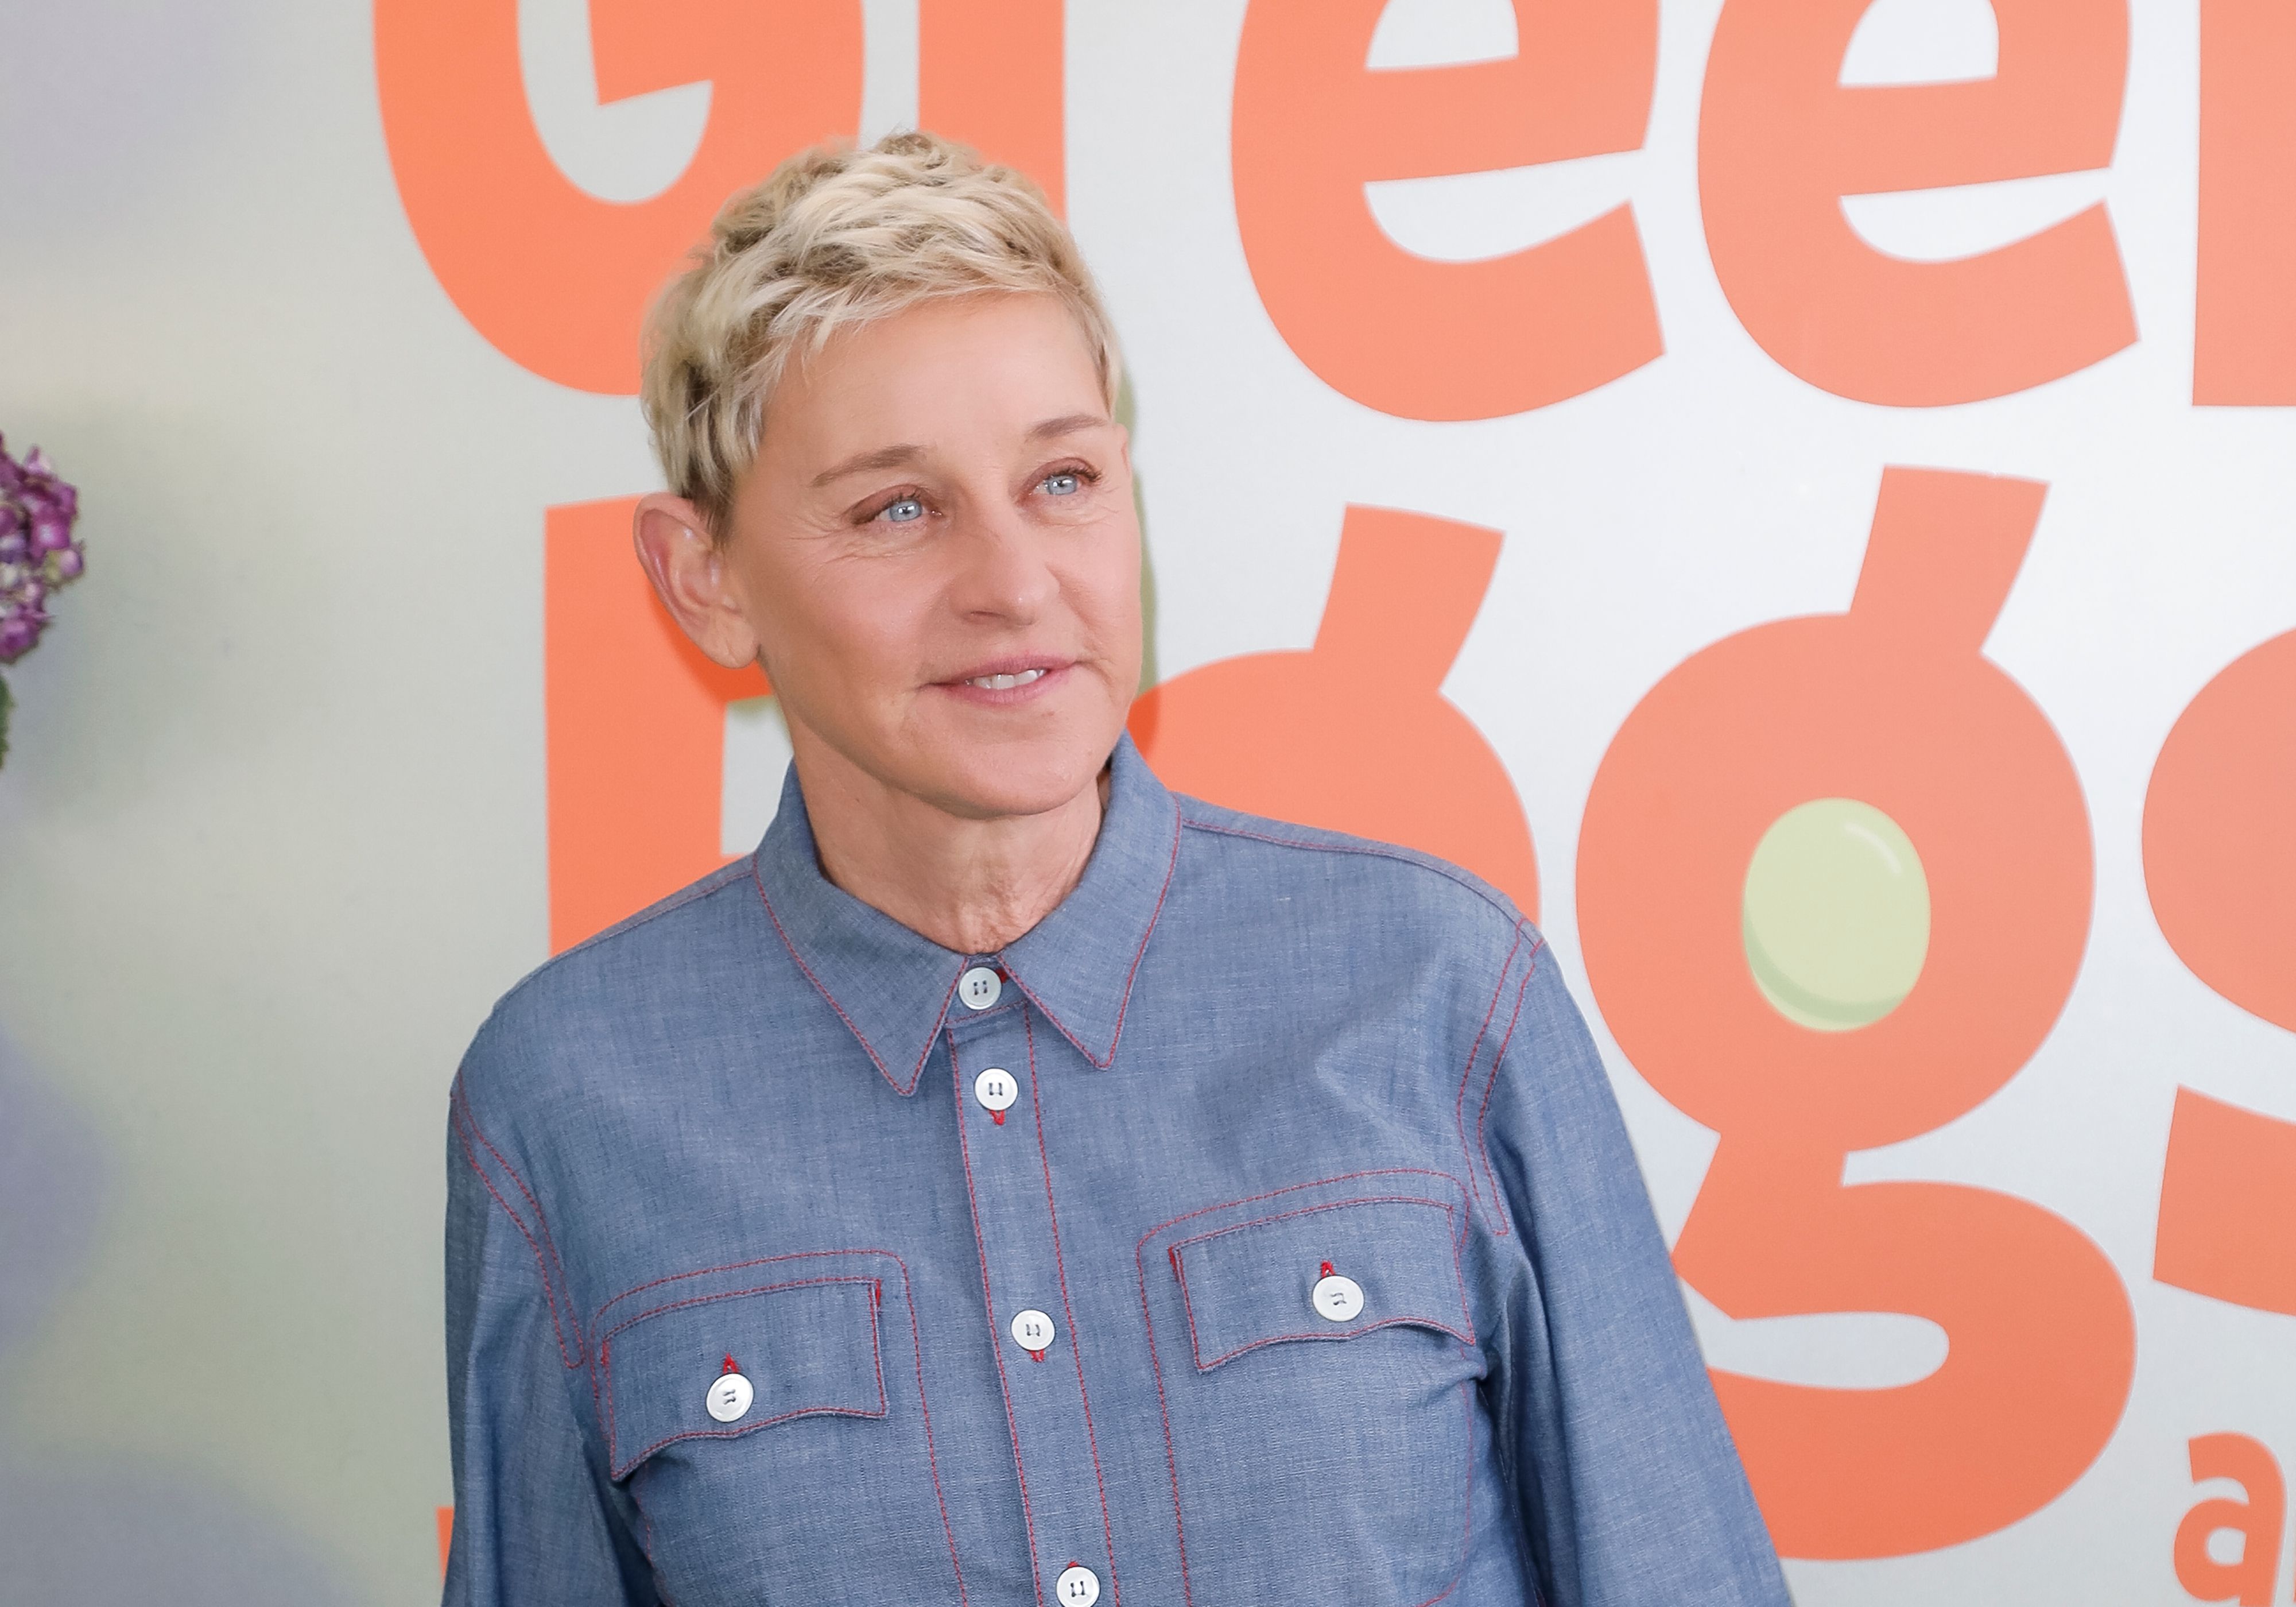 Ellen DeGeneres at the premiere of Netflix's "Green Eggs And Ham" at Hollywood American Legion on November 03, 2019 | Photo: Getty Images